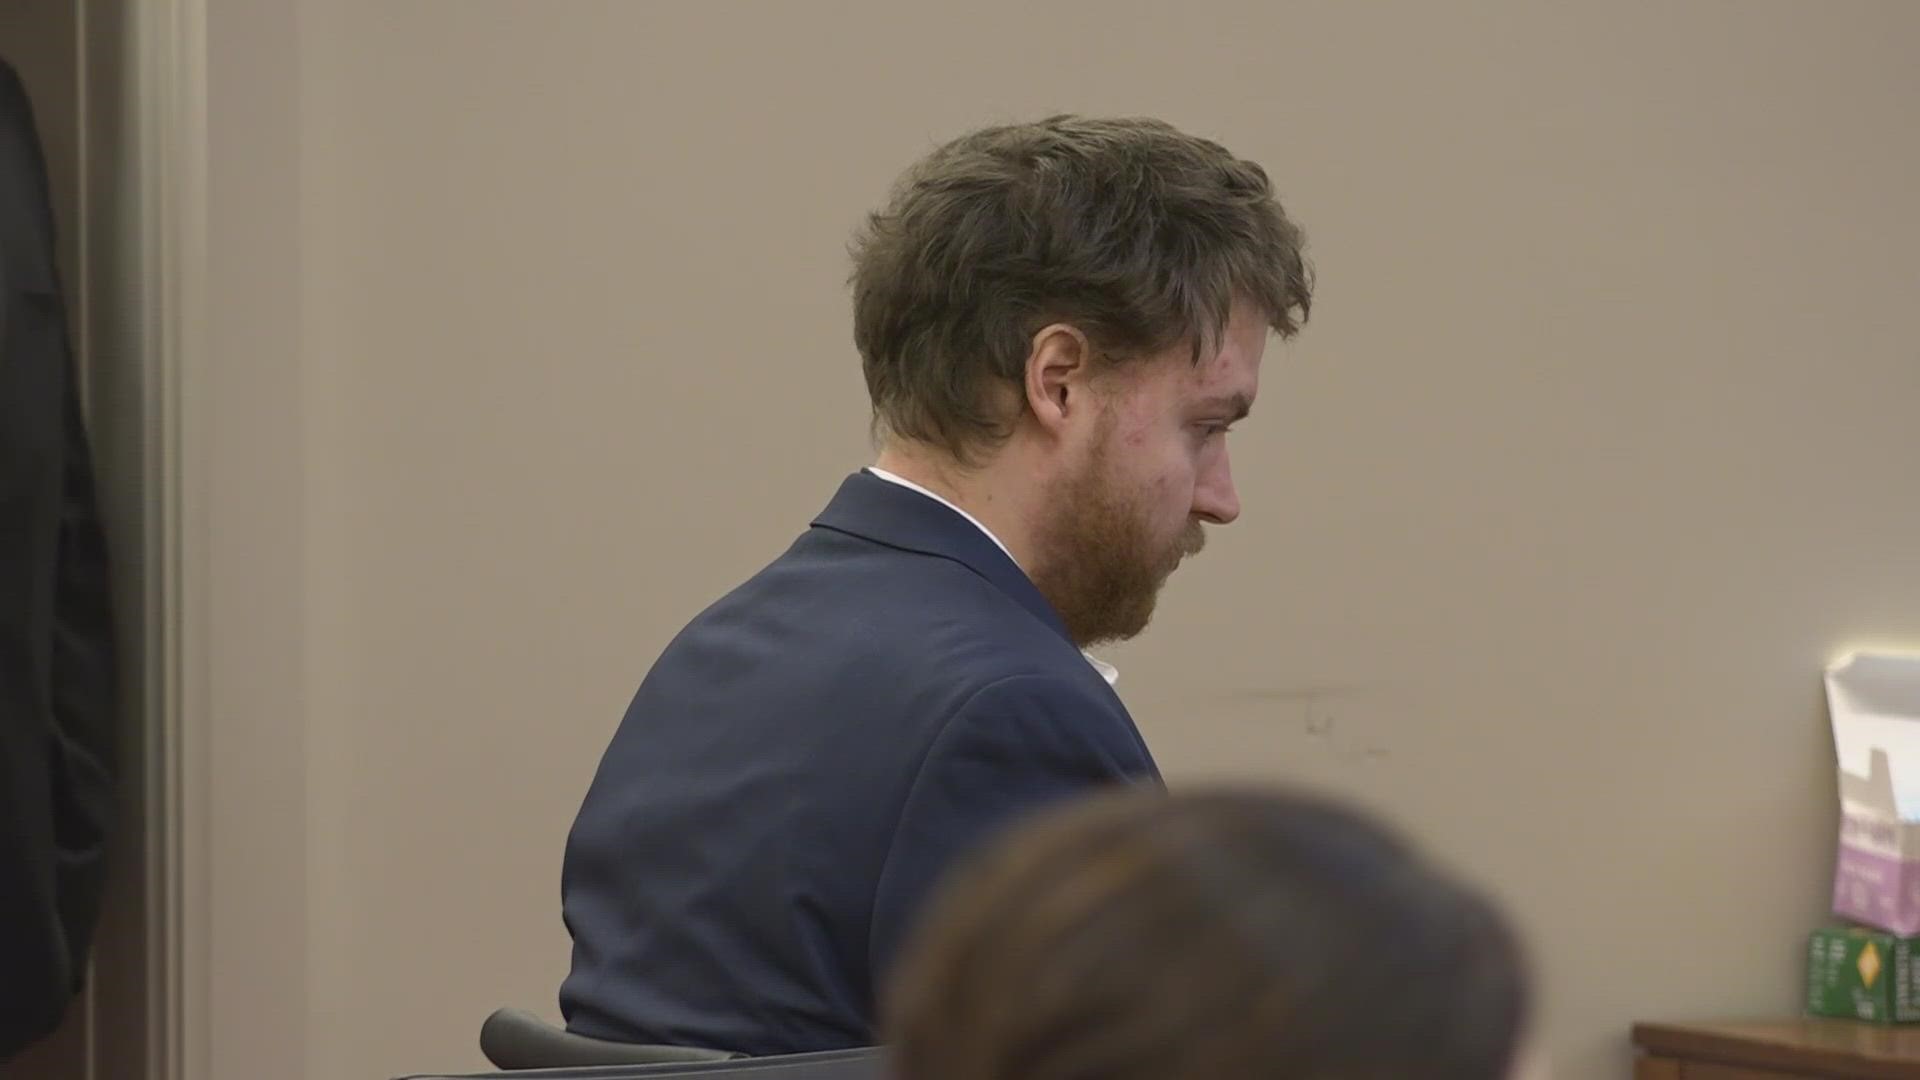 The jury found that Dylan Ketcham shot and killed Jordan Johnson and attempted to kill Caleb Trudeau, who testified against Ketcham in the trial.